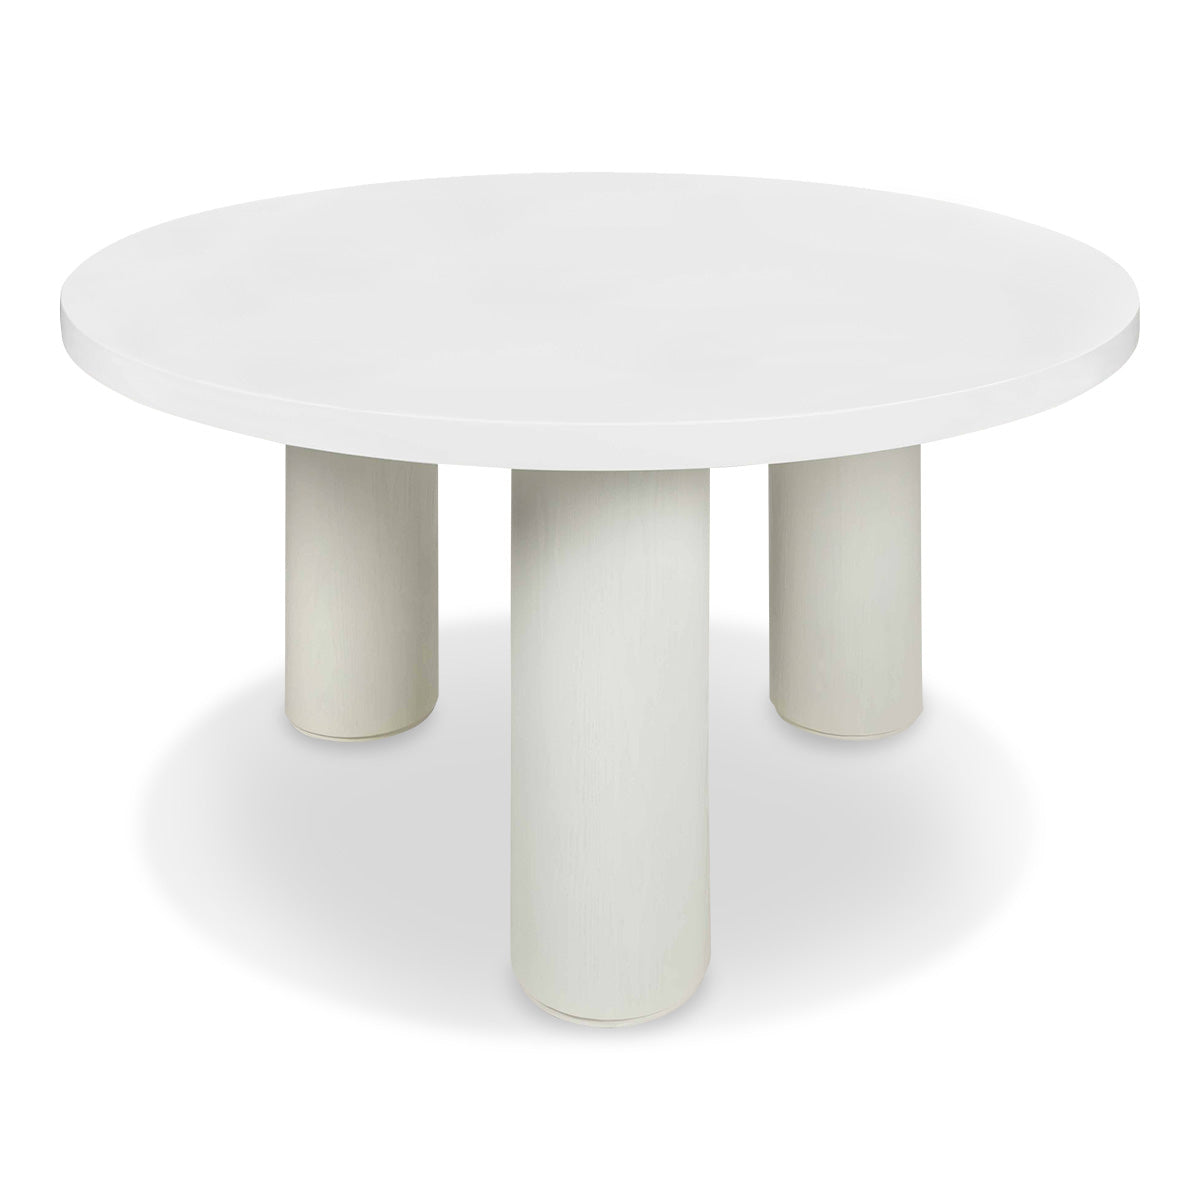 Oia Round Dining Table with Matte White Top and White Washed Oak Base